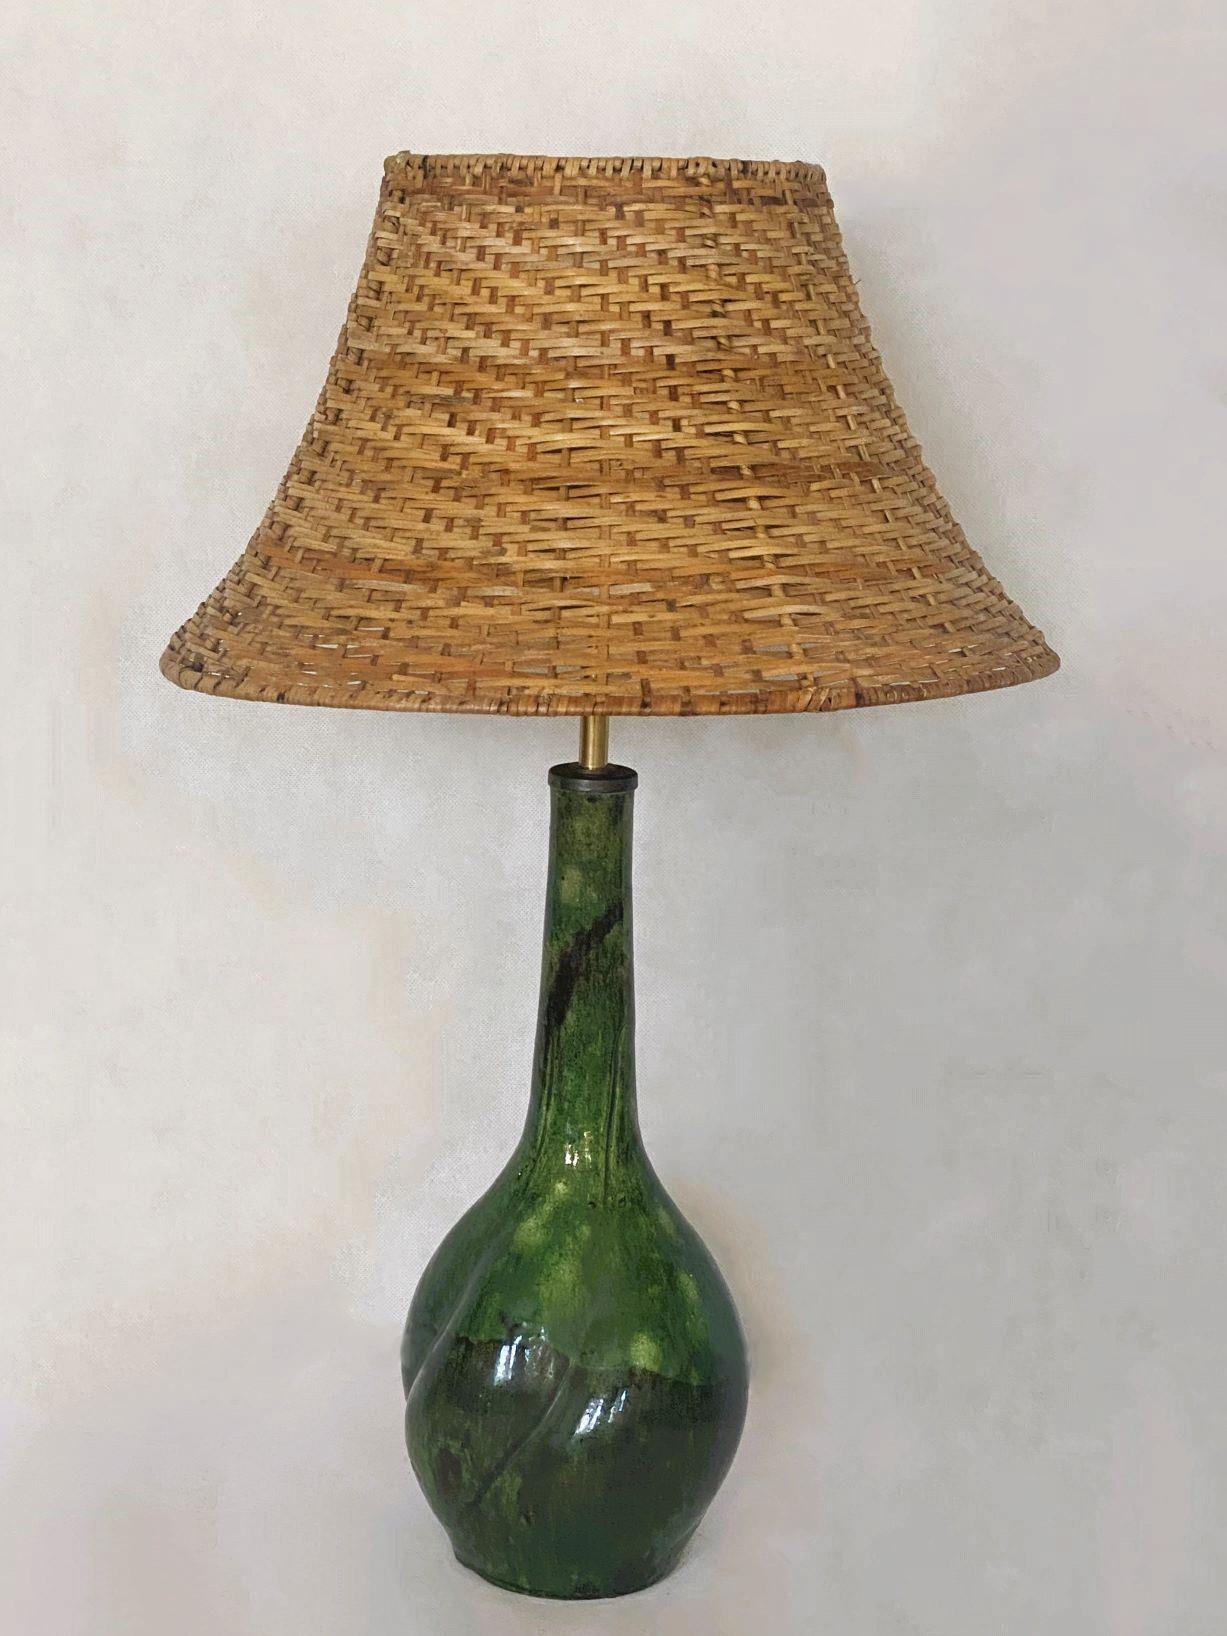 A green ceramic table lamp designed and produced in Denmark, 1960s. Features an organic motif, hand-painted and glazed, with hand-woven-wicker shade. This beautiful piece is in excelent condition, no damages, fully functional. It takes one E27 large